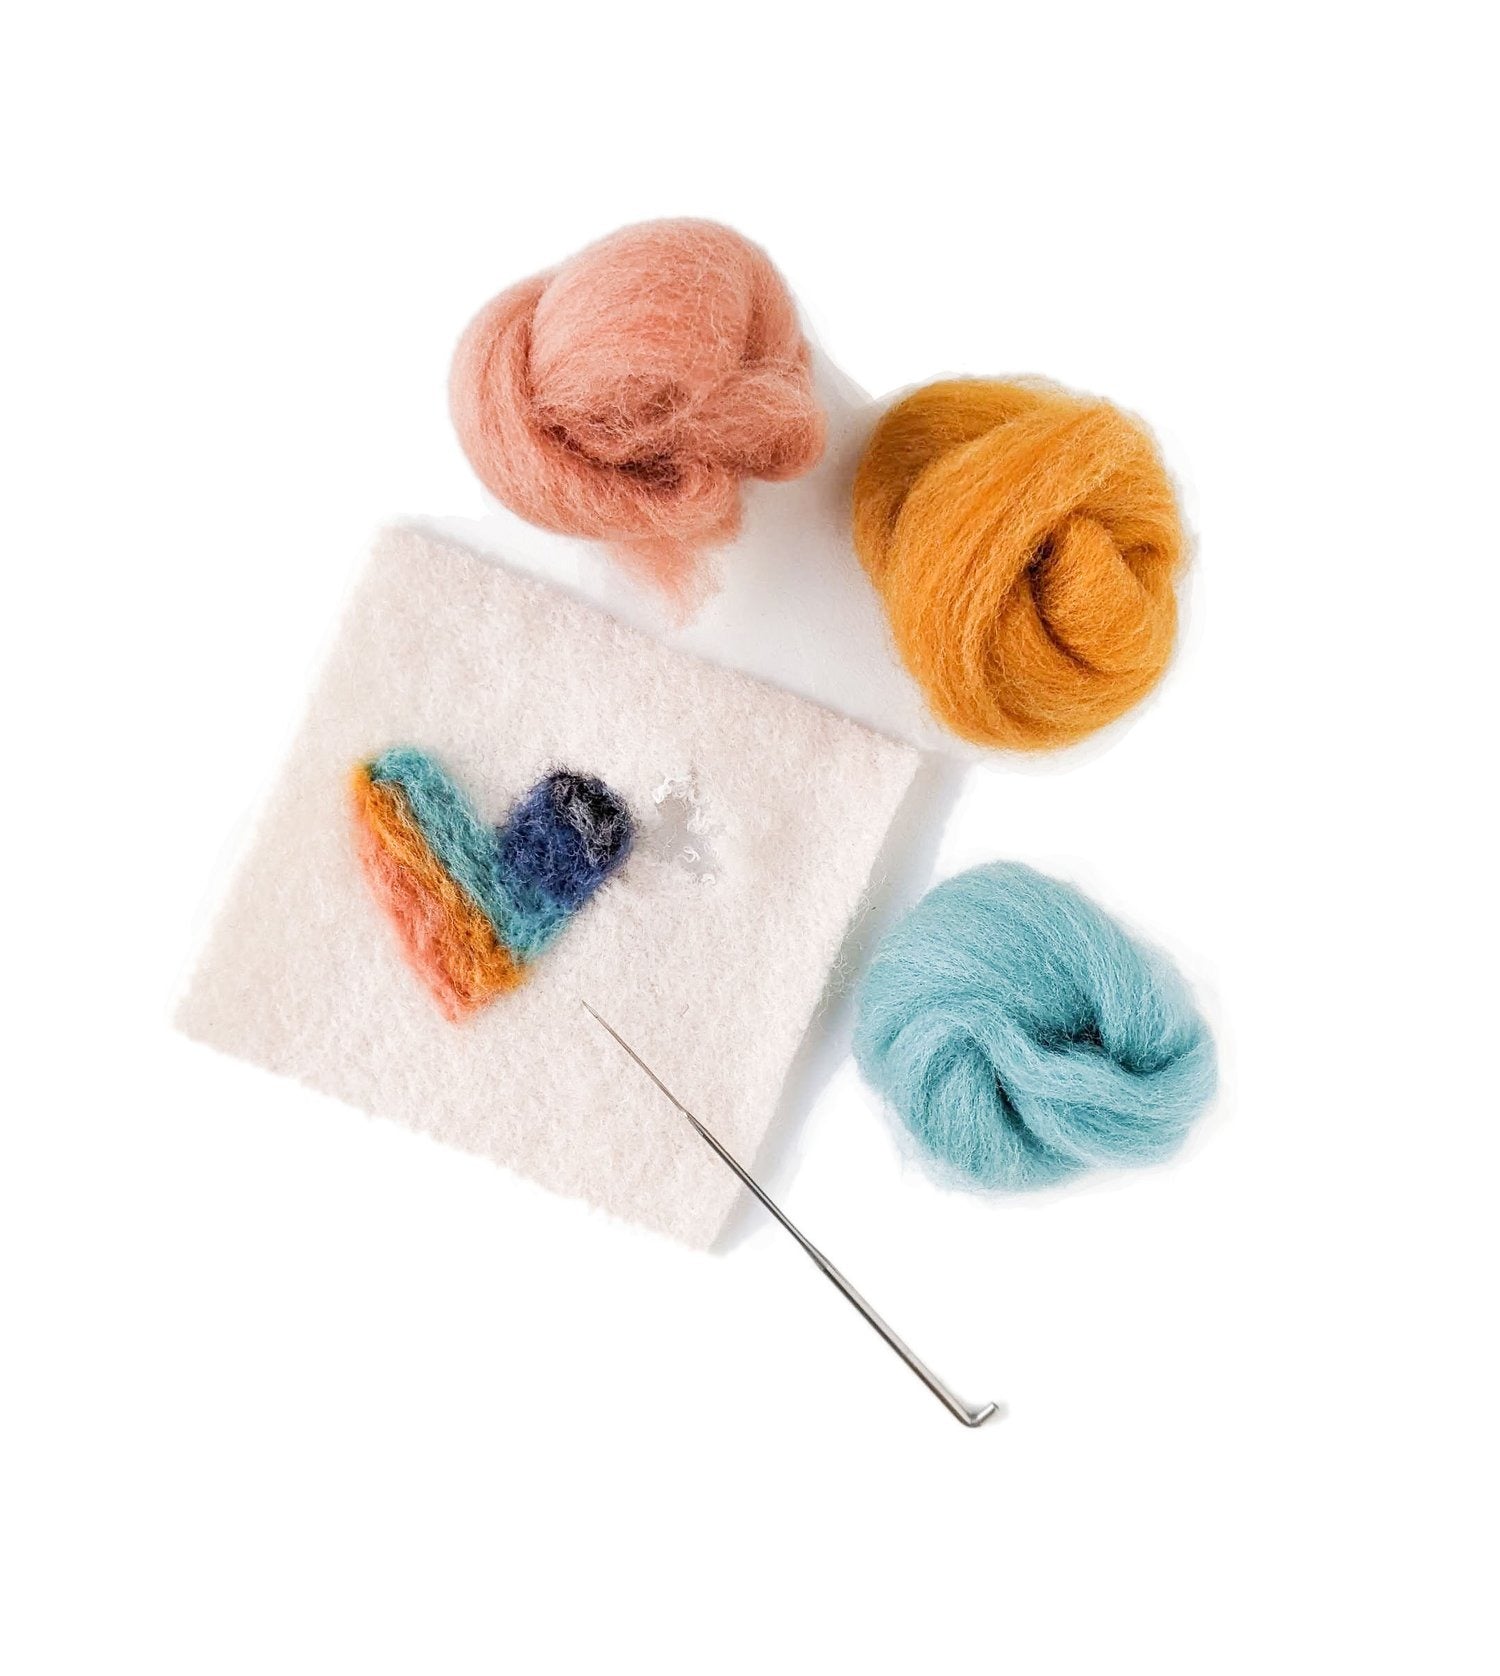 Which knitting needles do you need? - Gathered